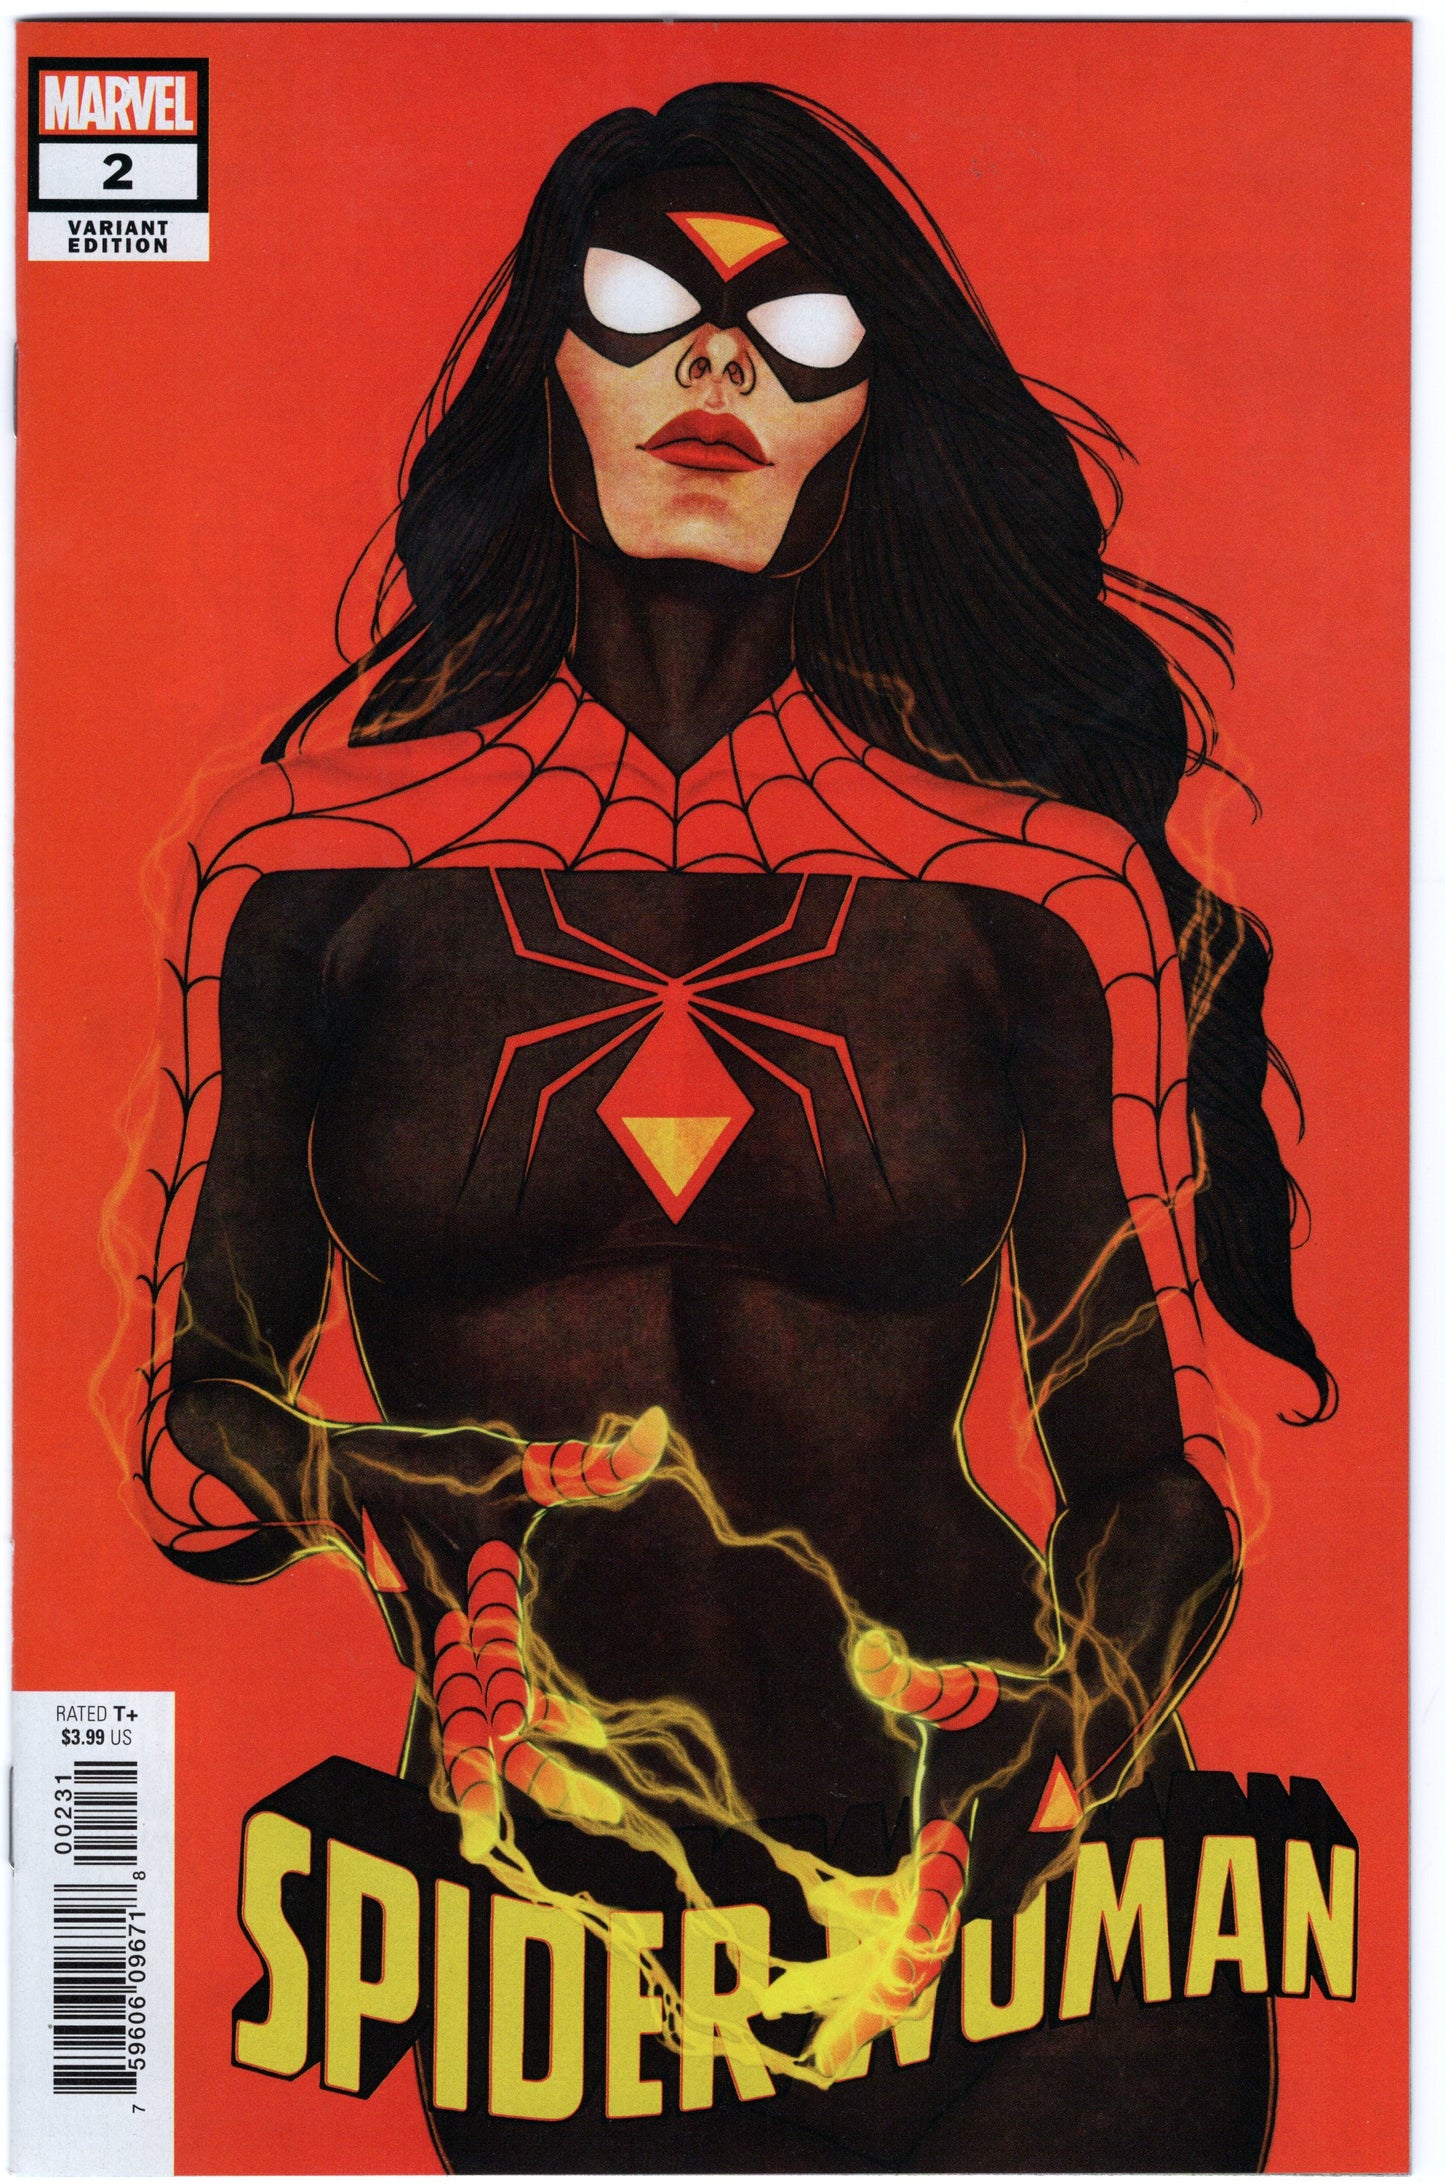 Spider-Woman - Issue #2 "Jenny Frison - 1:50 Variant Cover" (Sept. 2020 - Marvel Comics) NM-